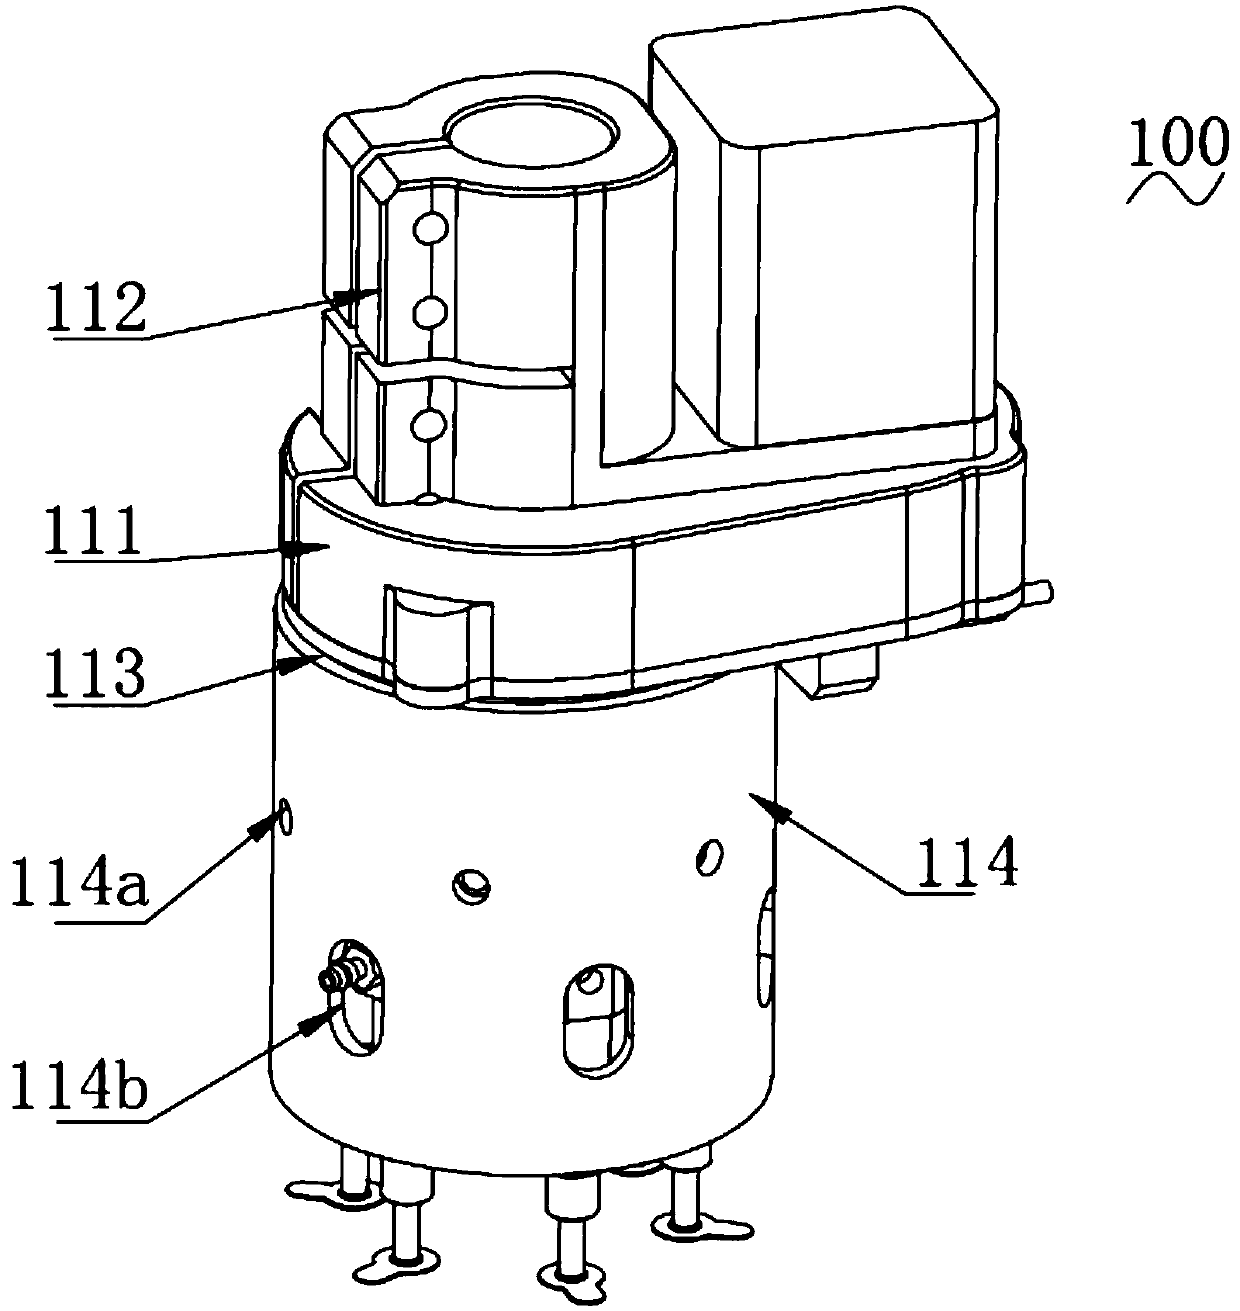 Multi-head material taking device based on cam driving lifting